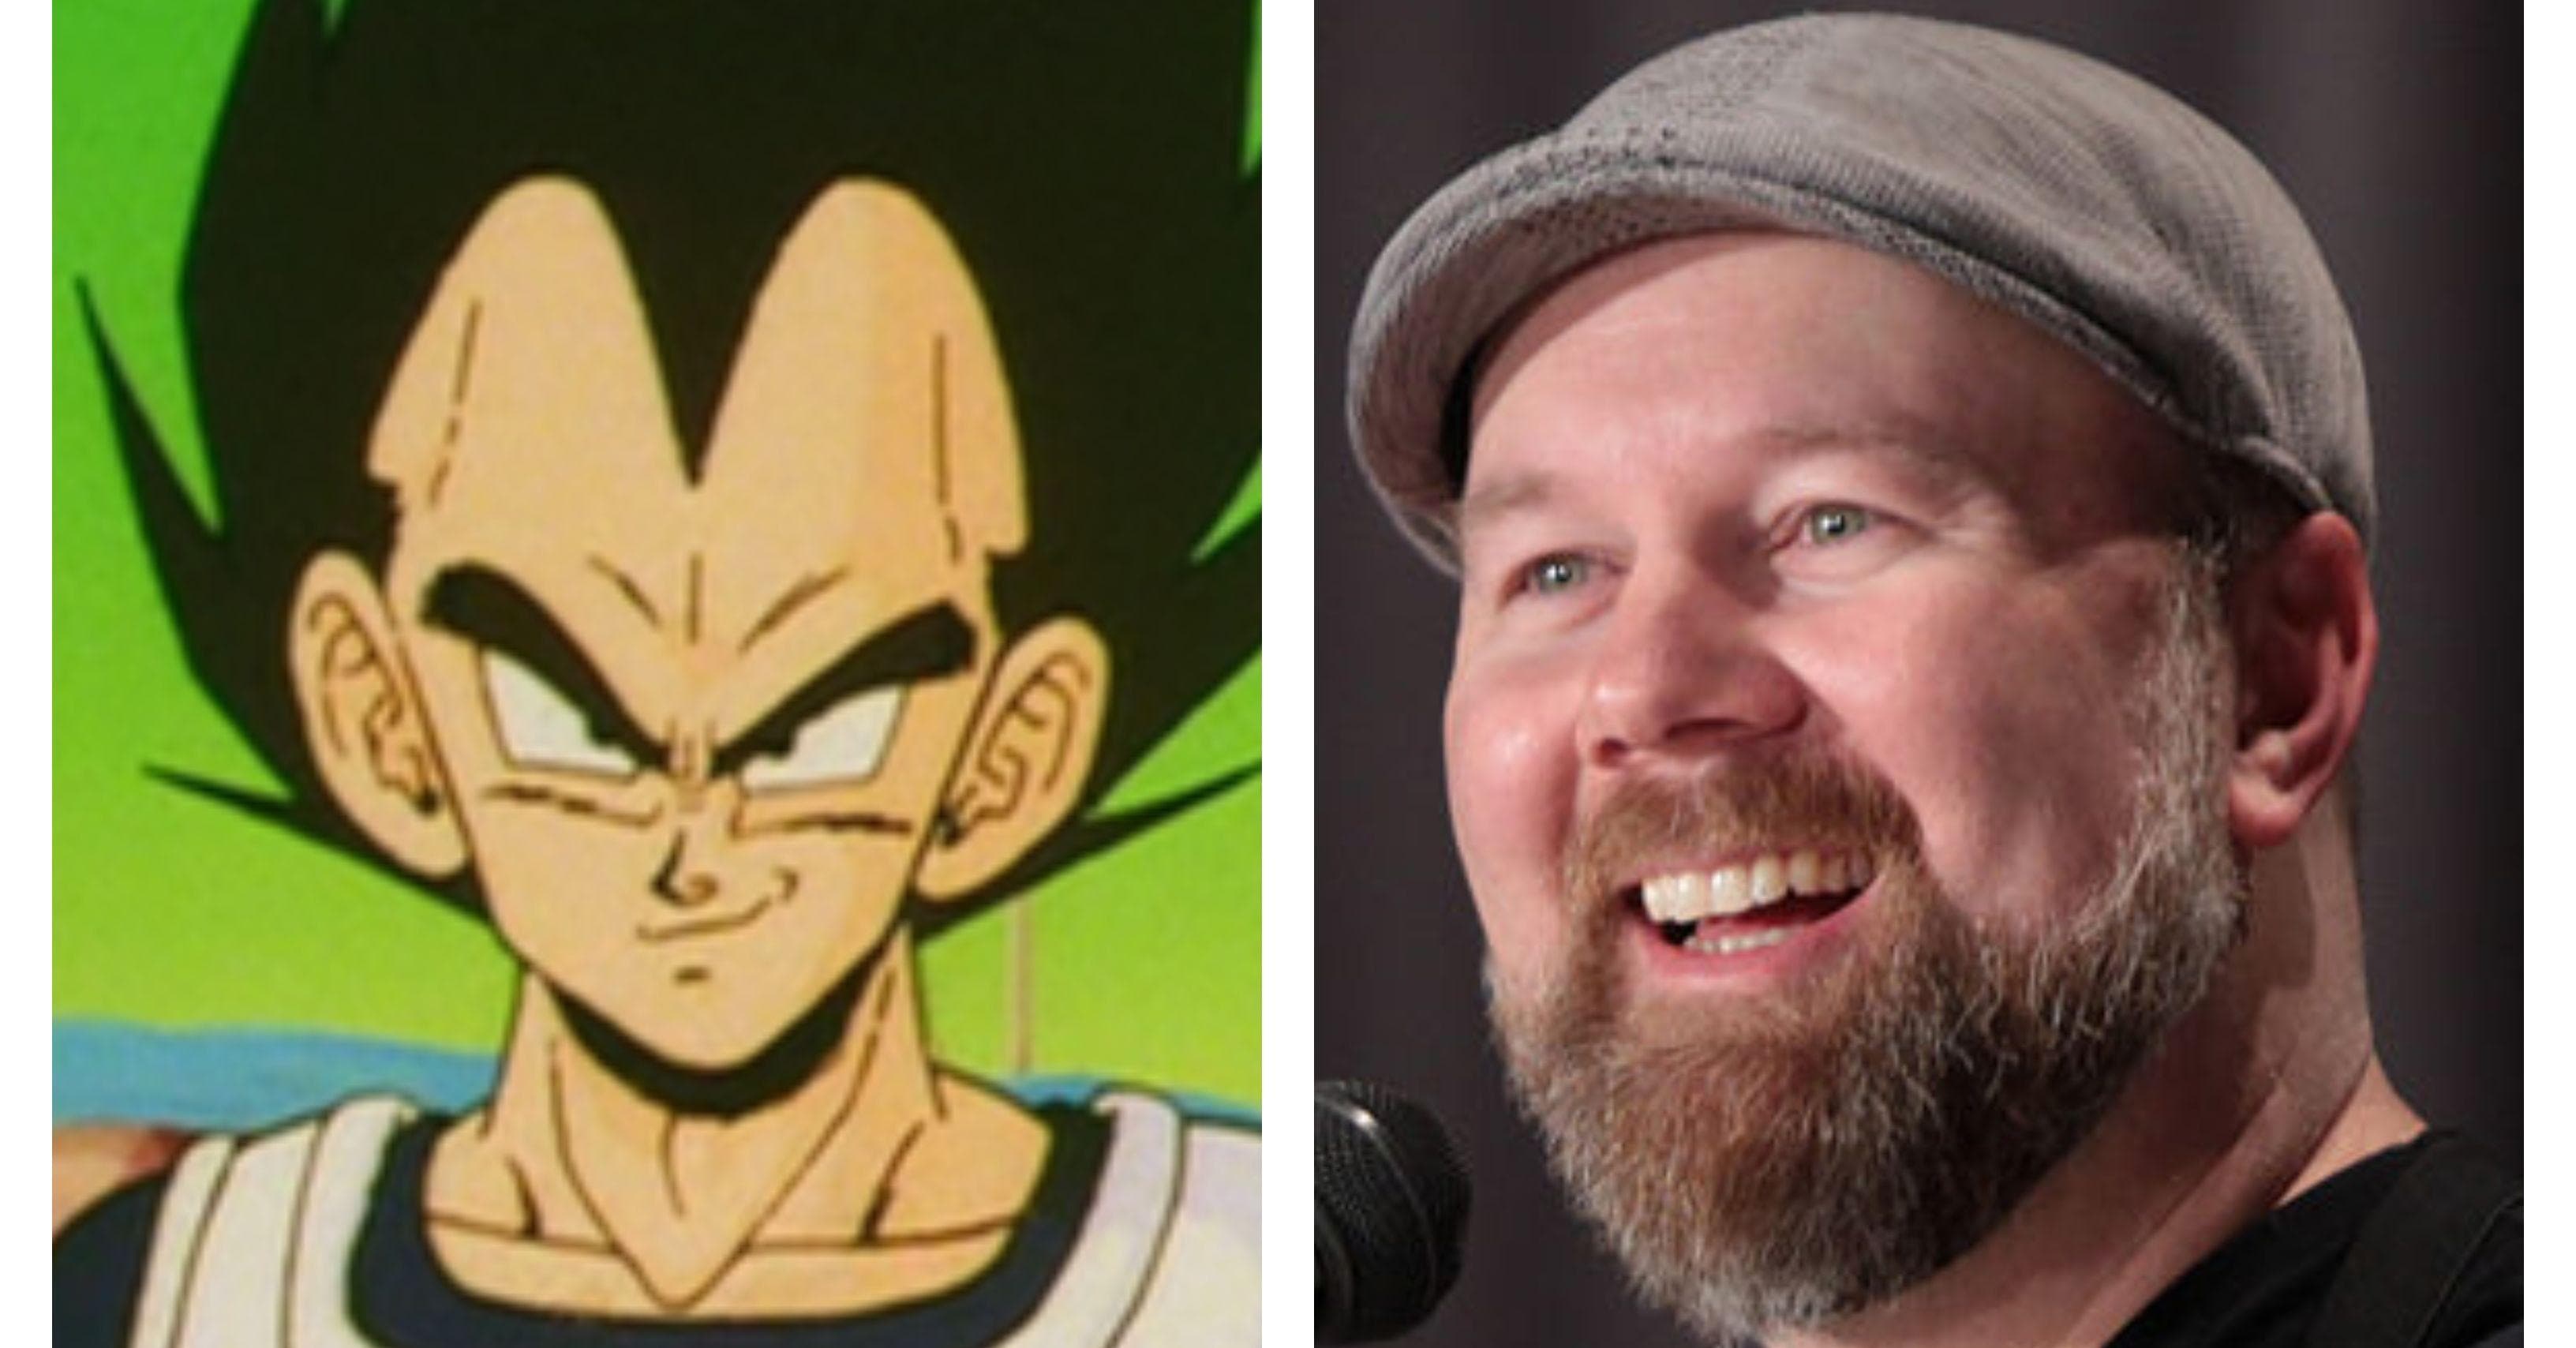 Awesome Con on X: Meet voice actor Christopher Sabat at #AwesomeCon!  @JustChrisSabat is the voice of #DragonBall's Vegeta, #OnePiece's Zoro,  #MyHeroAcademia's All Might, and tons more! 🎟️ Badges:   👤 Guests